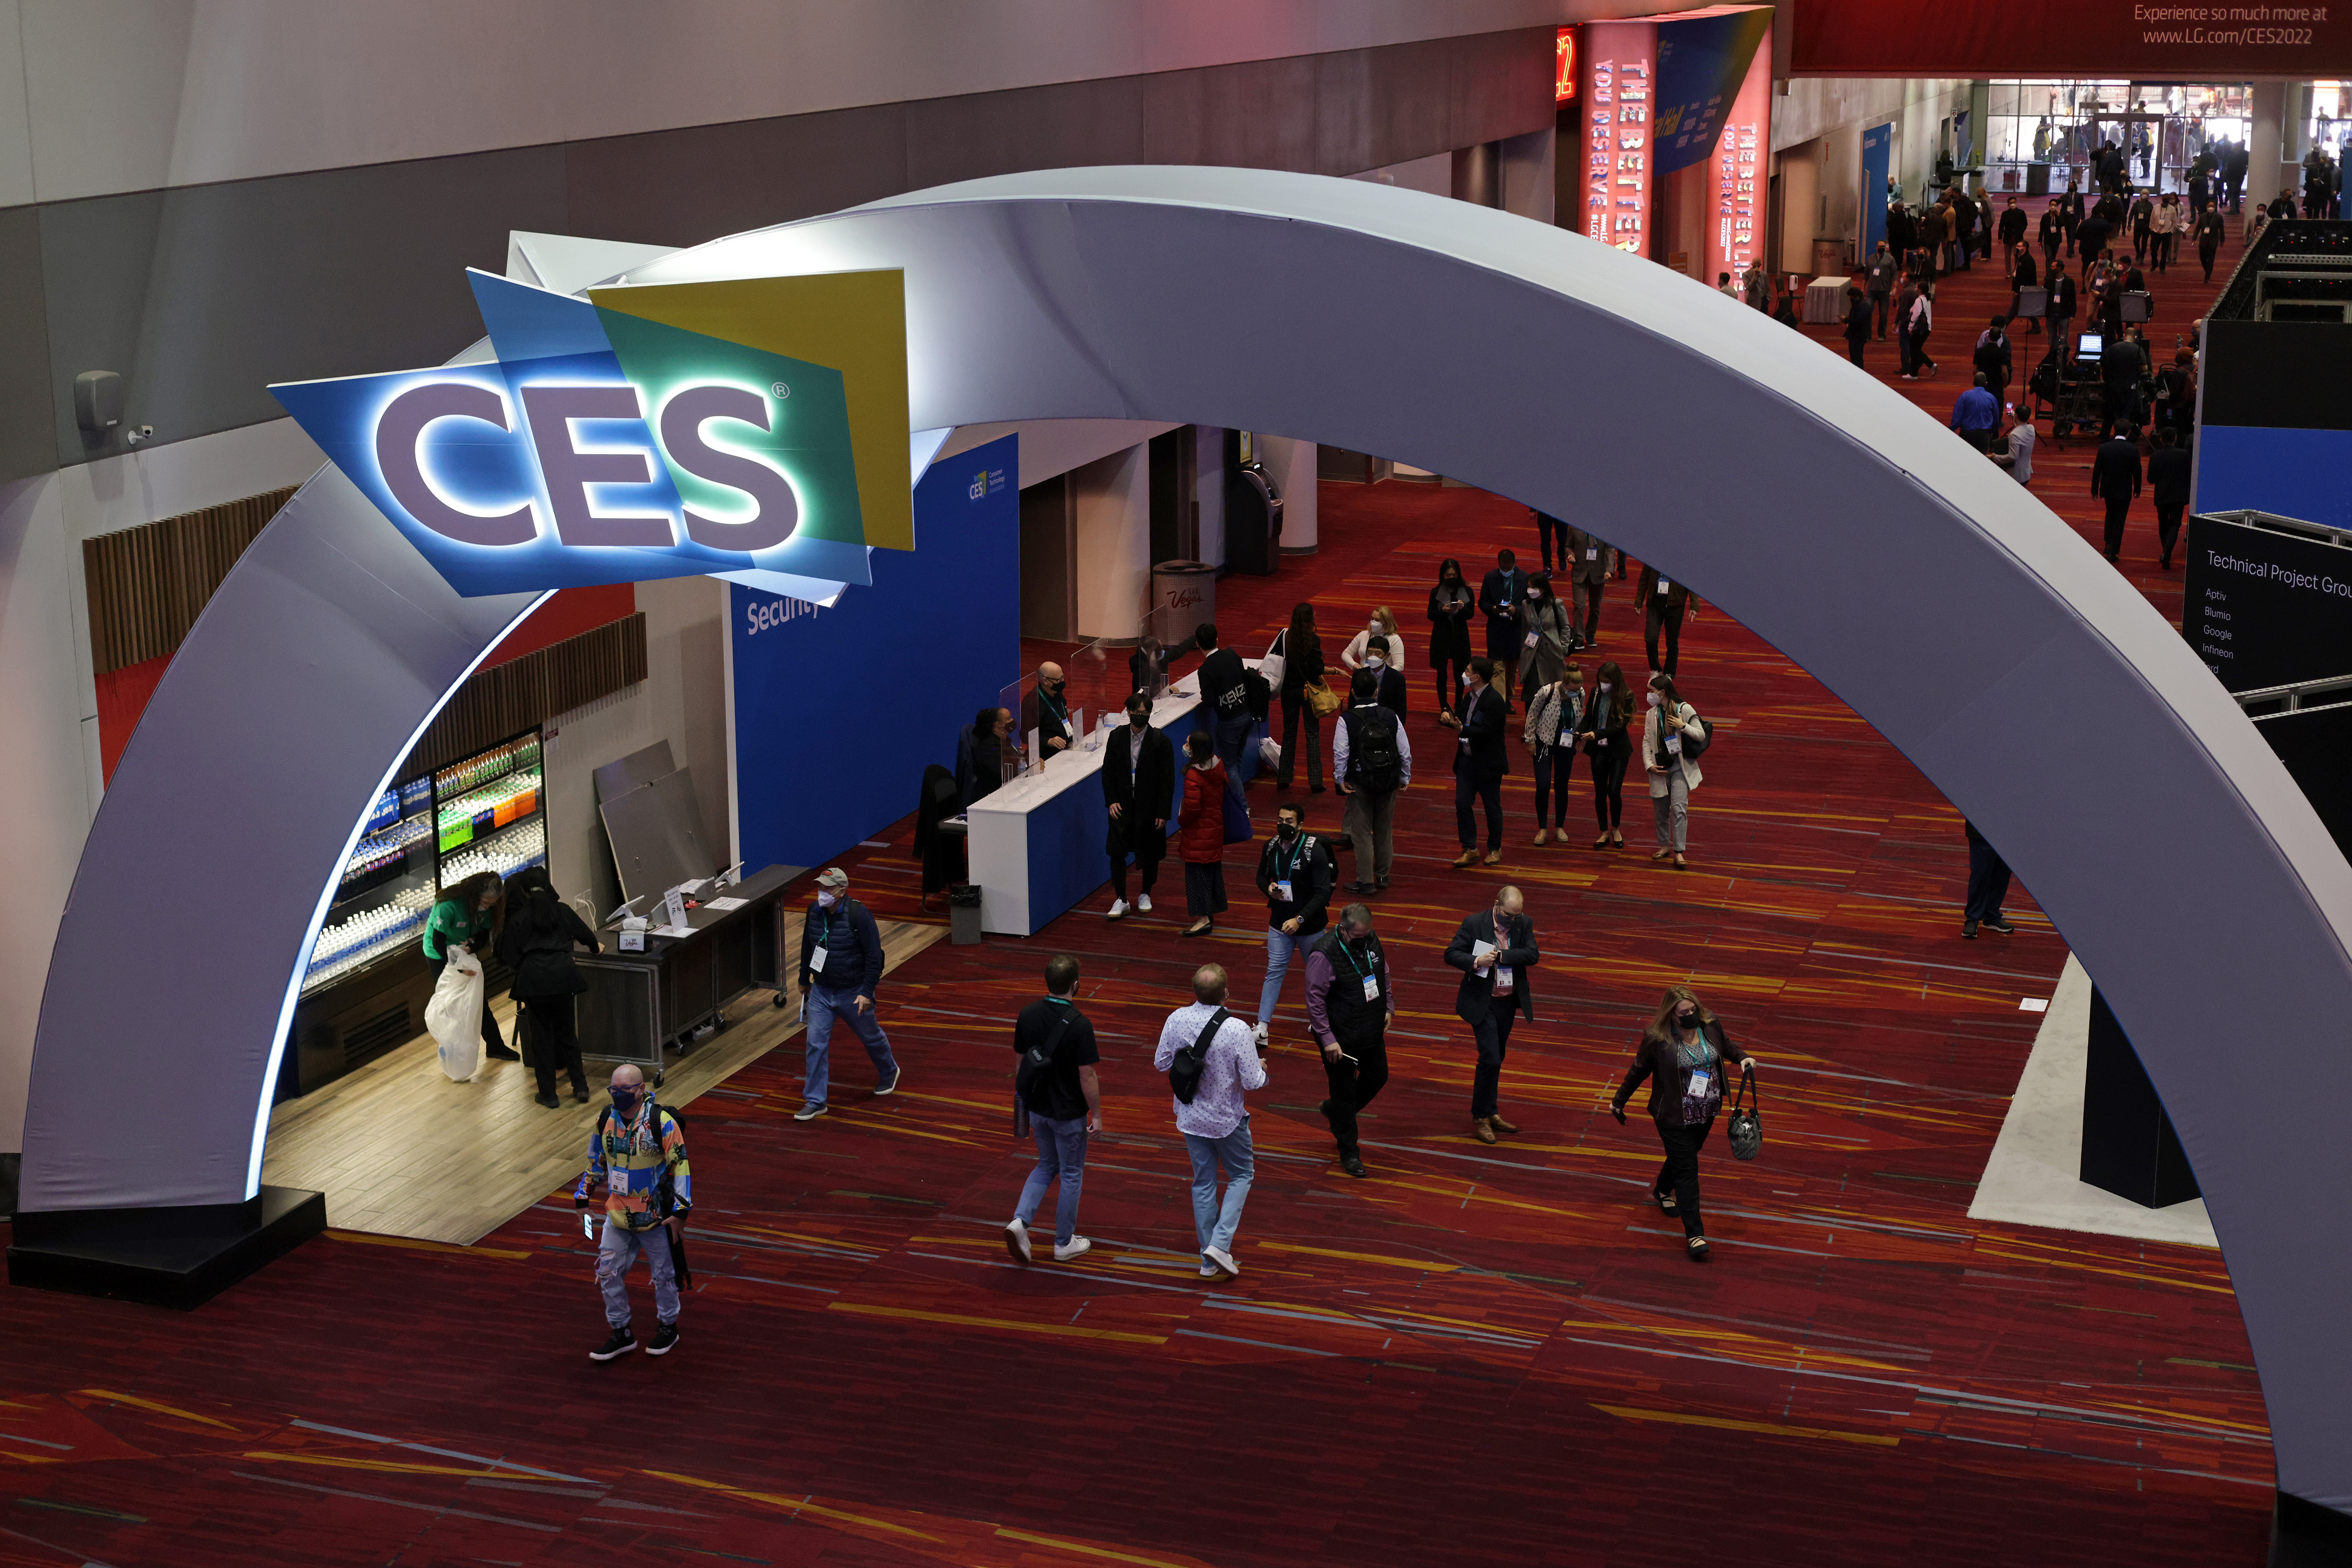 LAS VEGAS, NEVADA - JANUARY 05: Attendees walk down the aisle of the Las Vegas Convention Center on Day 1 of CES 2022 on January 5, 2022 in Las Vegas, Nevada.  CES, the world's largest annual consumer technology trade show, is being held in person until Jan. 7, with some companies opting to attend in person only or cancel attendance due to concerns about a large increase in COVID-19 cases.  (Photo by Alex Wong/Getty Images)